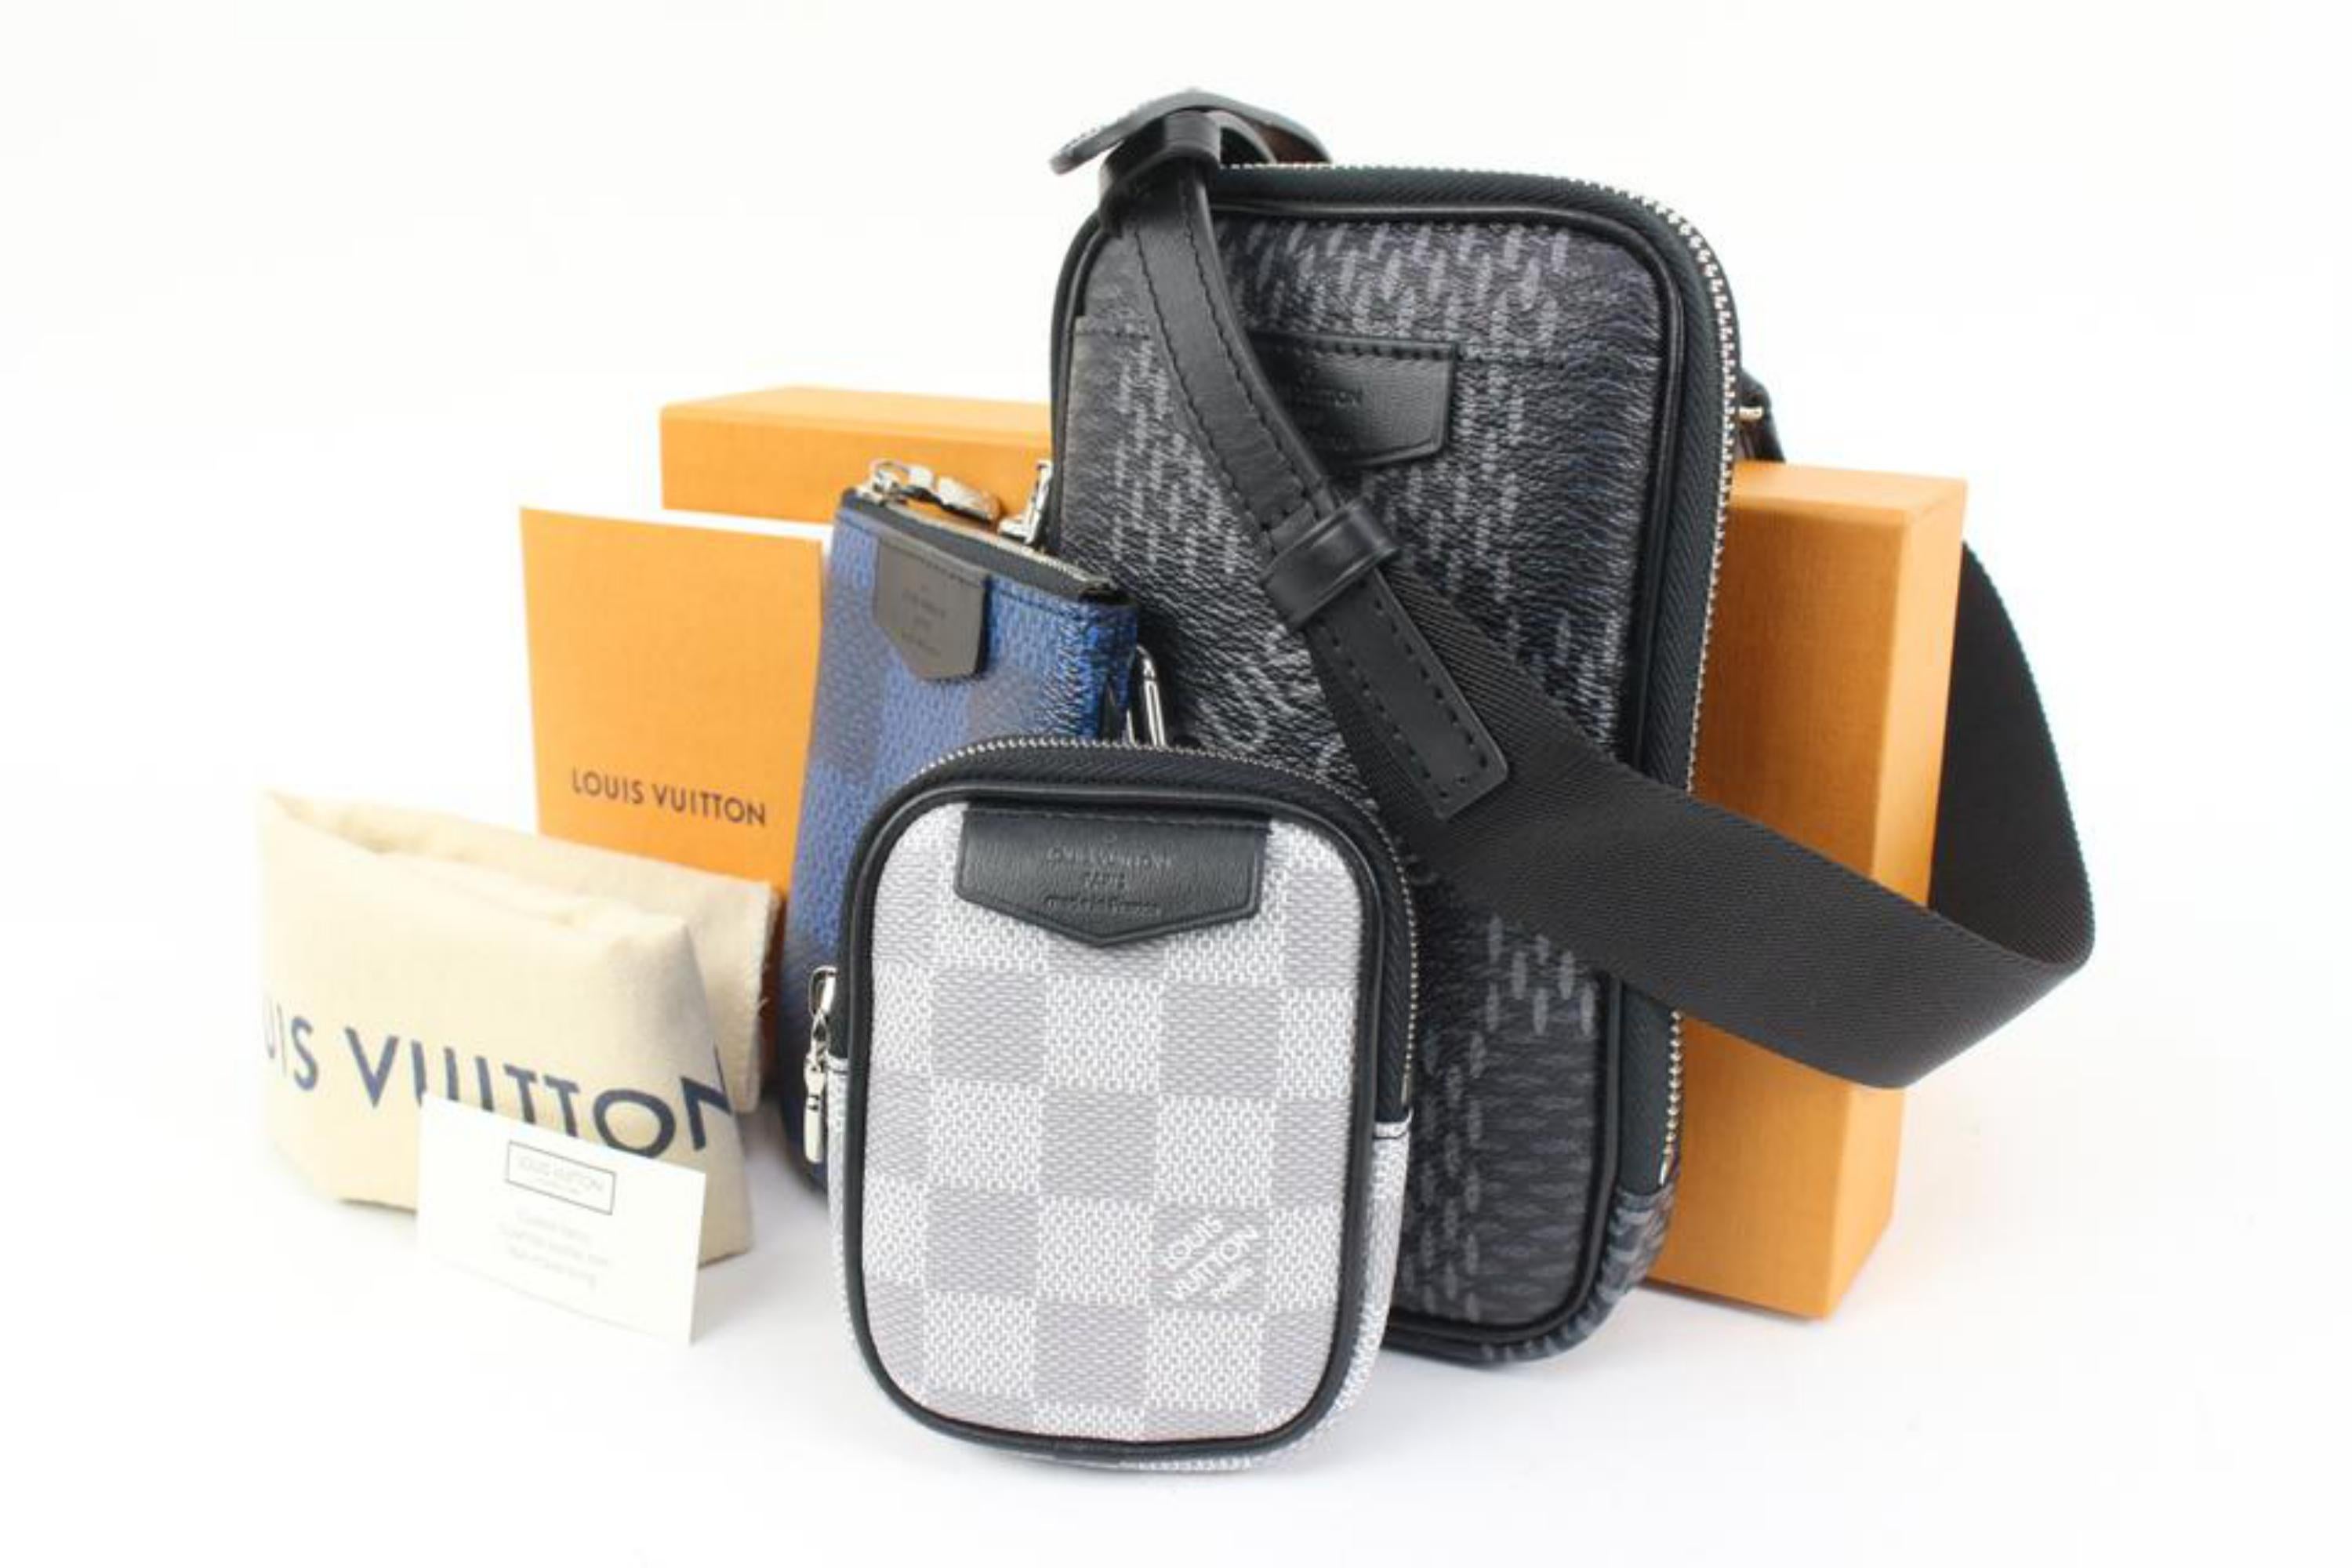 Louis Vuitton Multicolor Damier Modular Pouch Trio Crossbody Bag 47lk325s
Date Code/Serial Number: SP3280
Made In: France
Measurements: Length:  White/Grey Pouch: 3